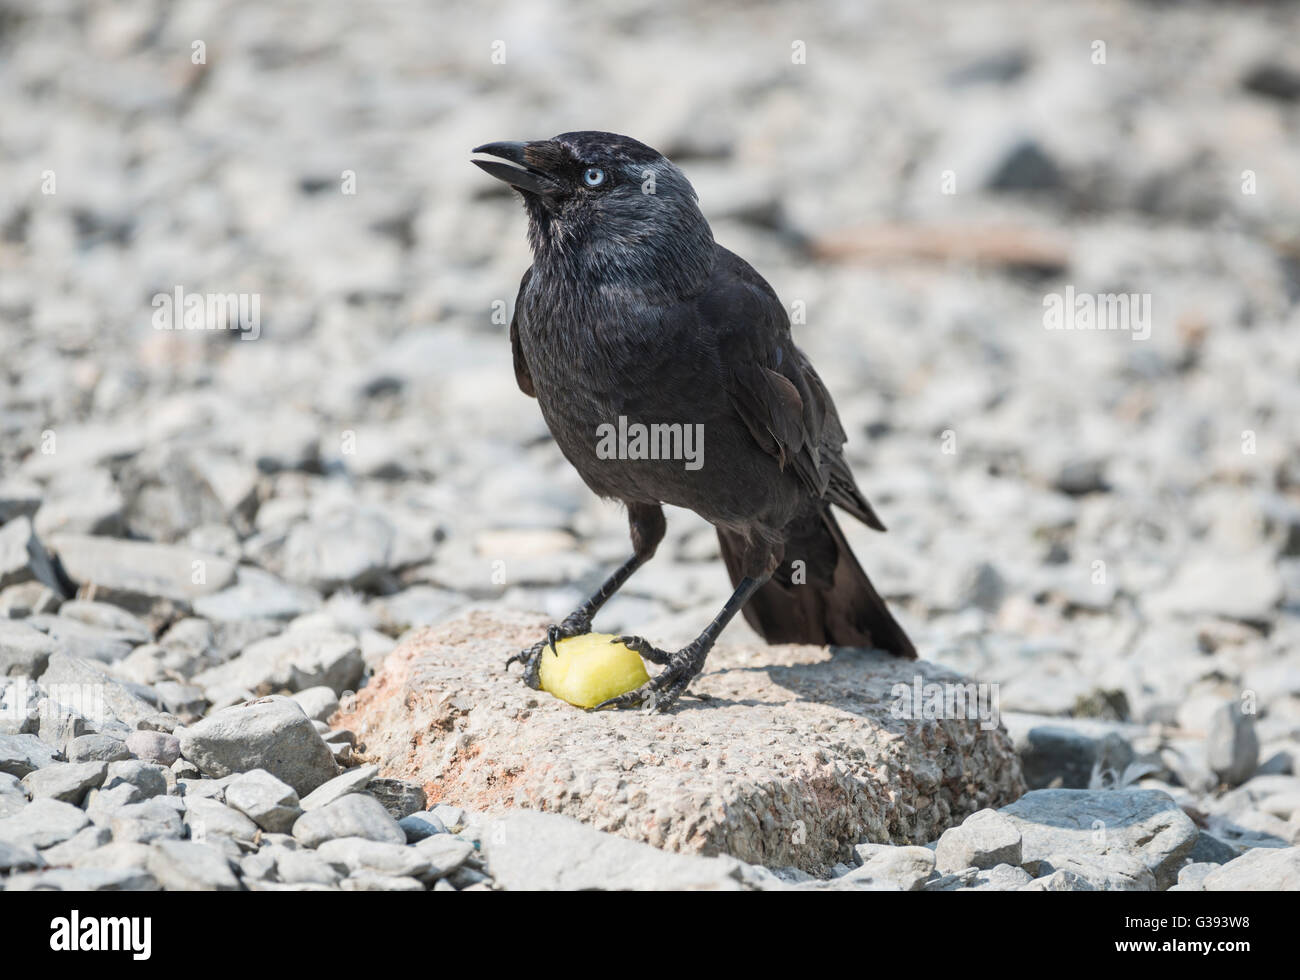 Jackdaw perched on a rock with a piece of fruit Stock Photo